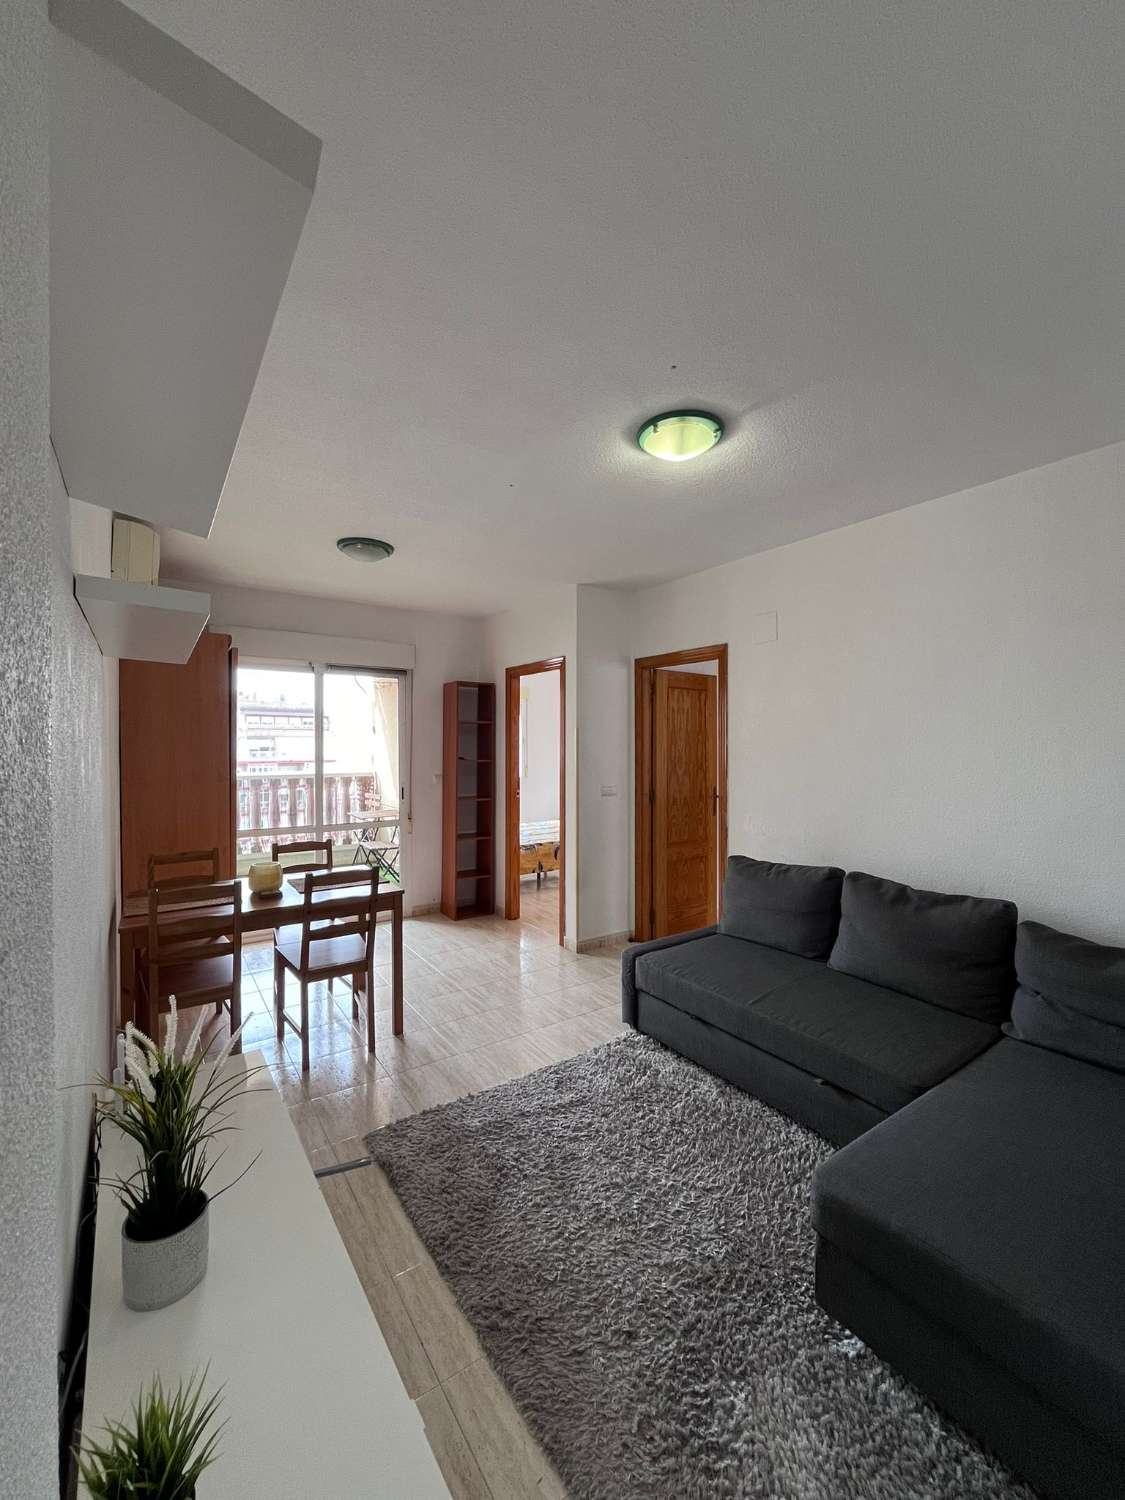 2 bedroom apartment with pool and ready to move into in Torrevieja (Costa Blanca South)